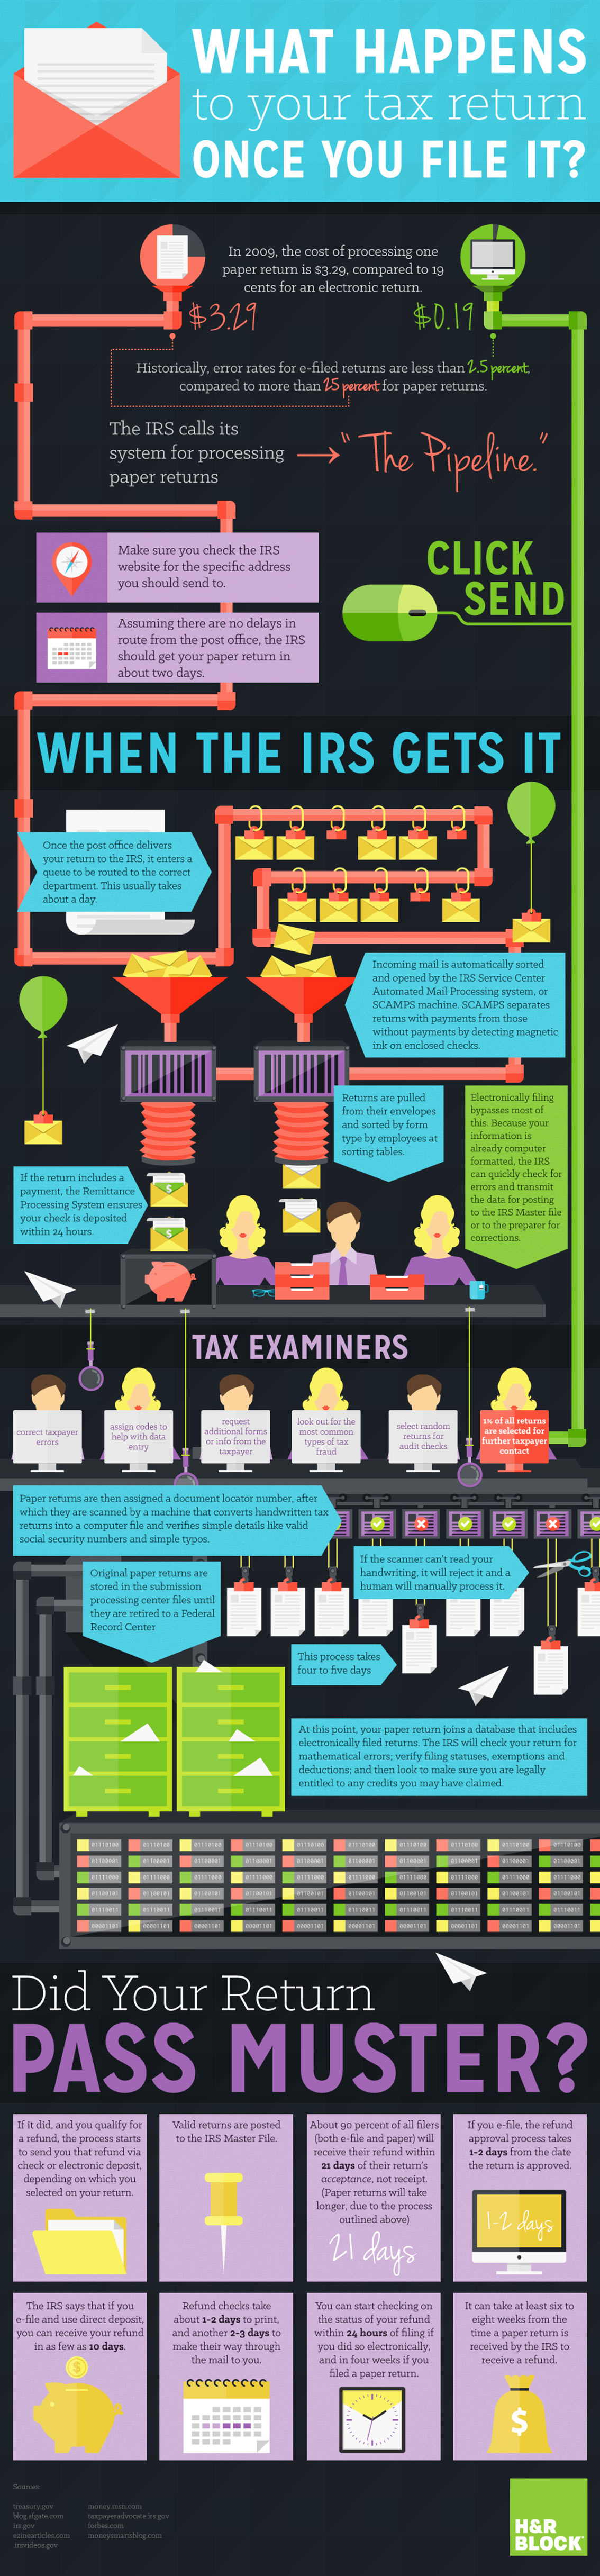 What Happens To Your Tax Return Once You File It Infographic